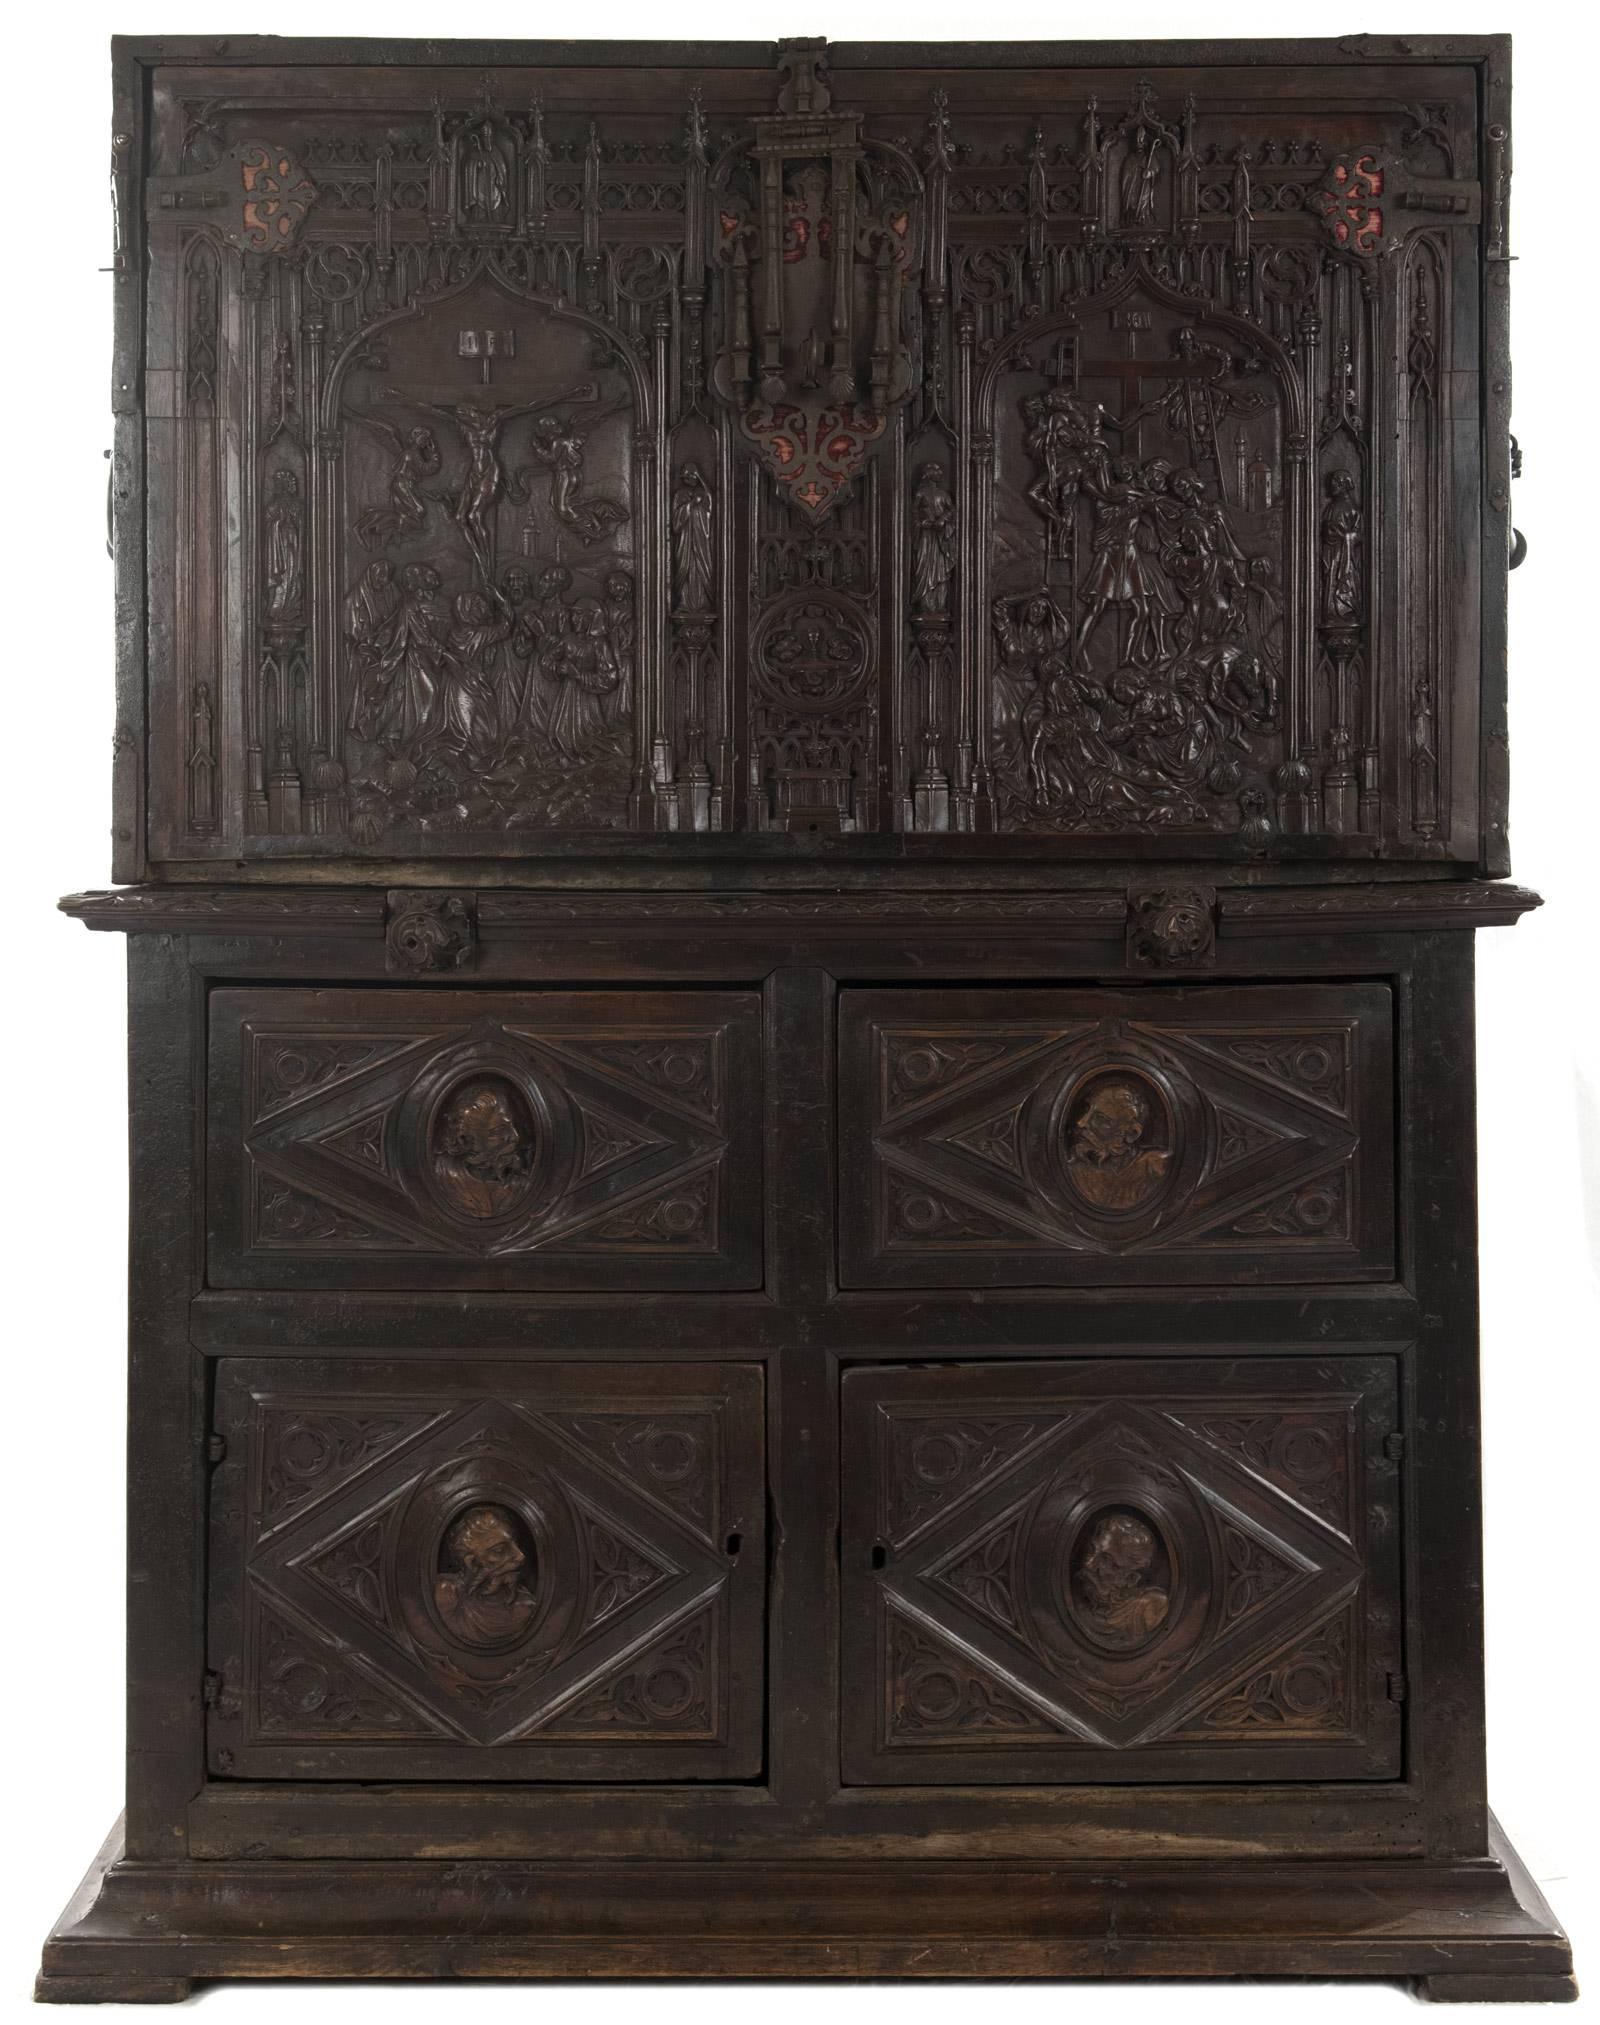 A museum-quality Spanish vargueño or cabinet on stand. When closed the upper portion features a detailed high-relief, multi-figural depiction of the Crucifixion and Lamentation of Jesus Christ. The lower portion has four large panels, each carved